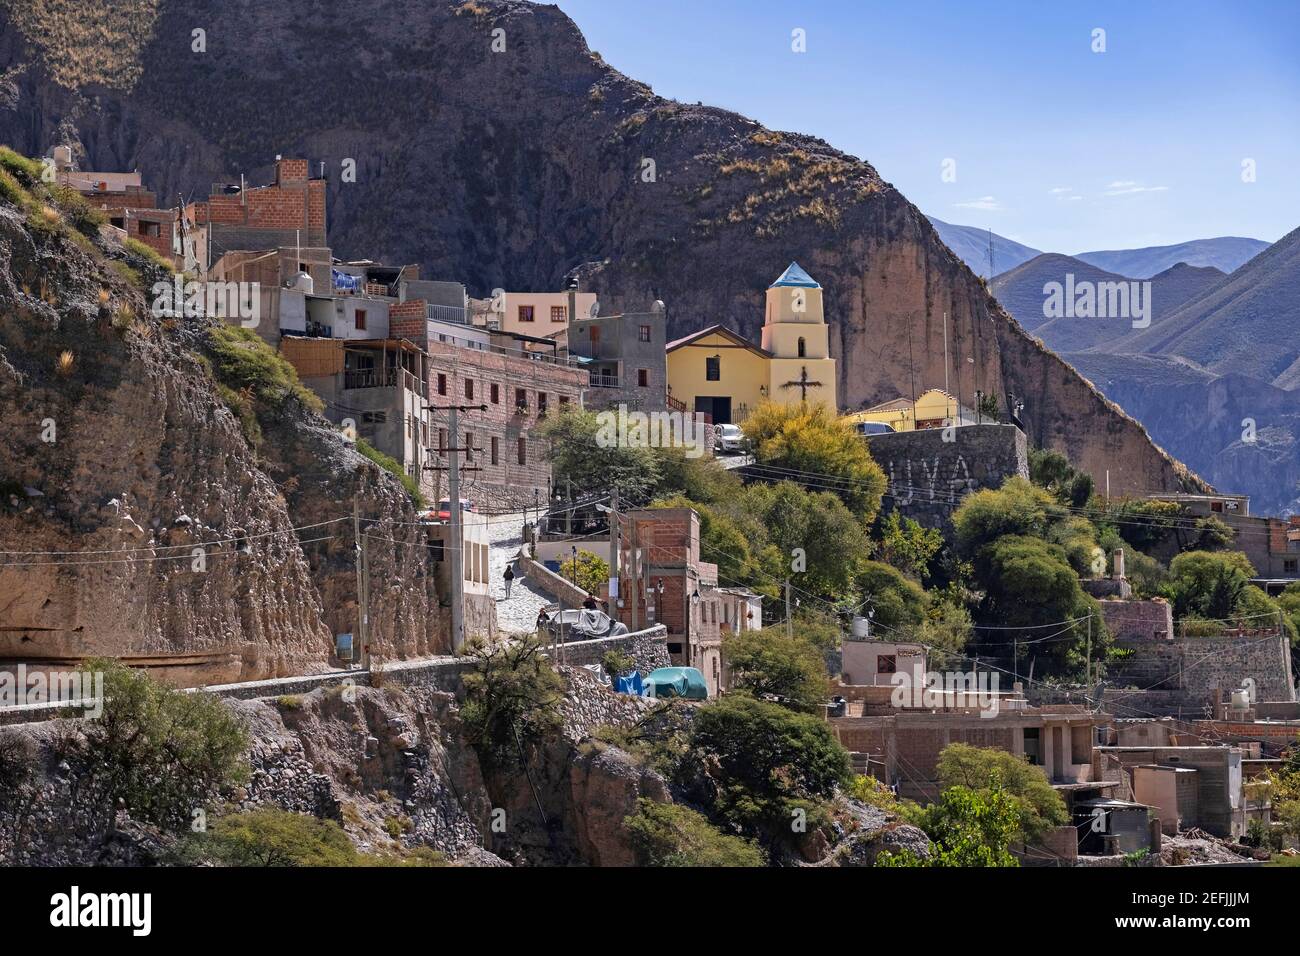 Village Iruya with its 17th century church, nestled against the mountainside in the Salta Province in northwestern Argentina Stock Photo